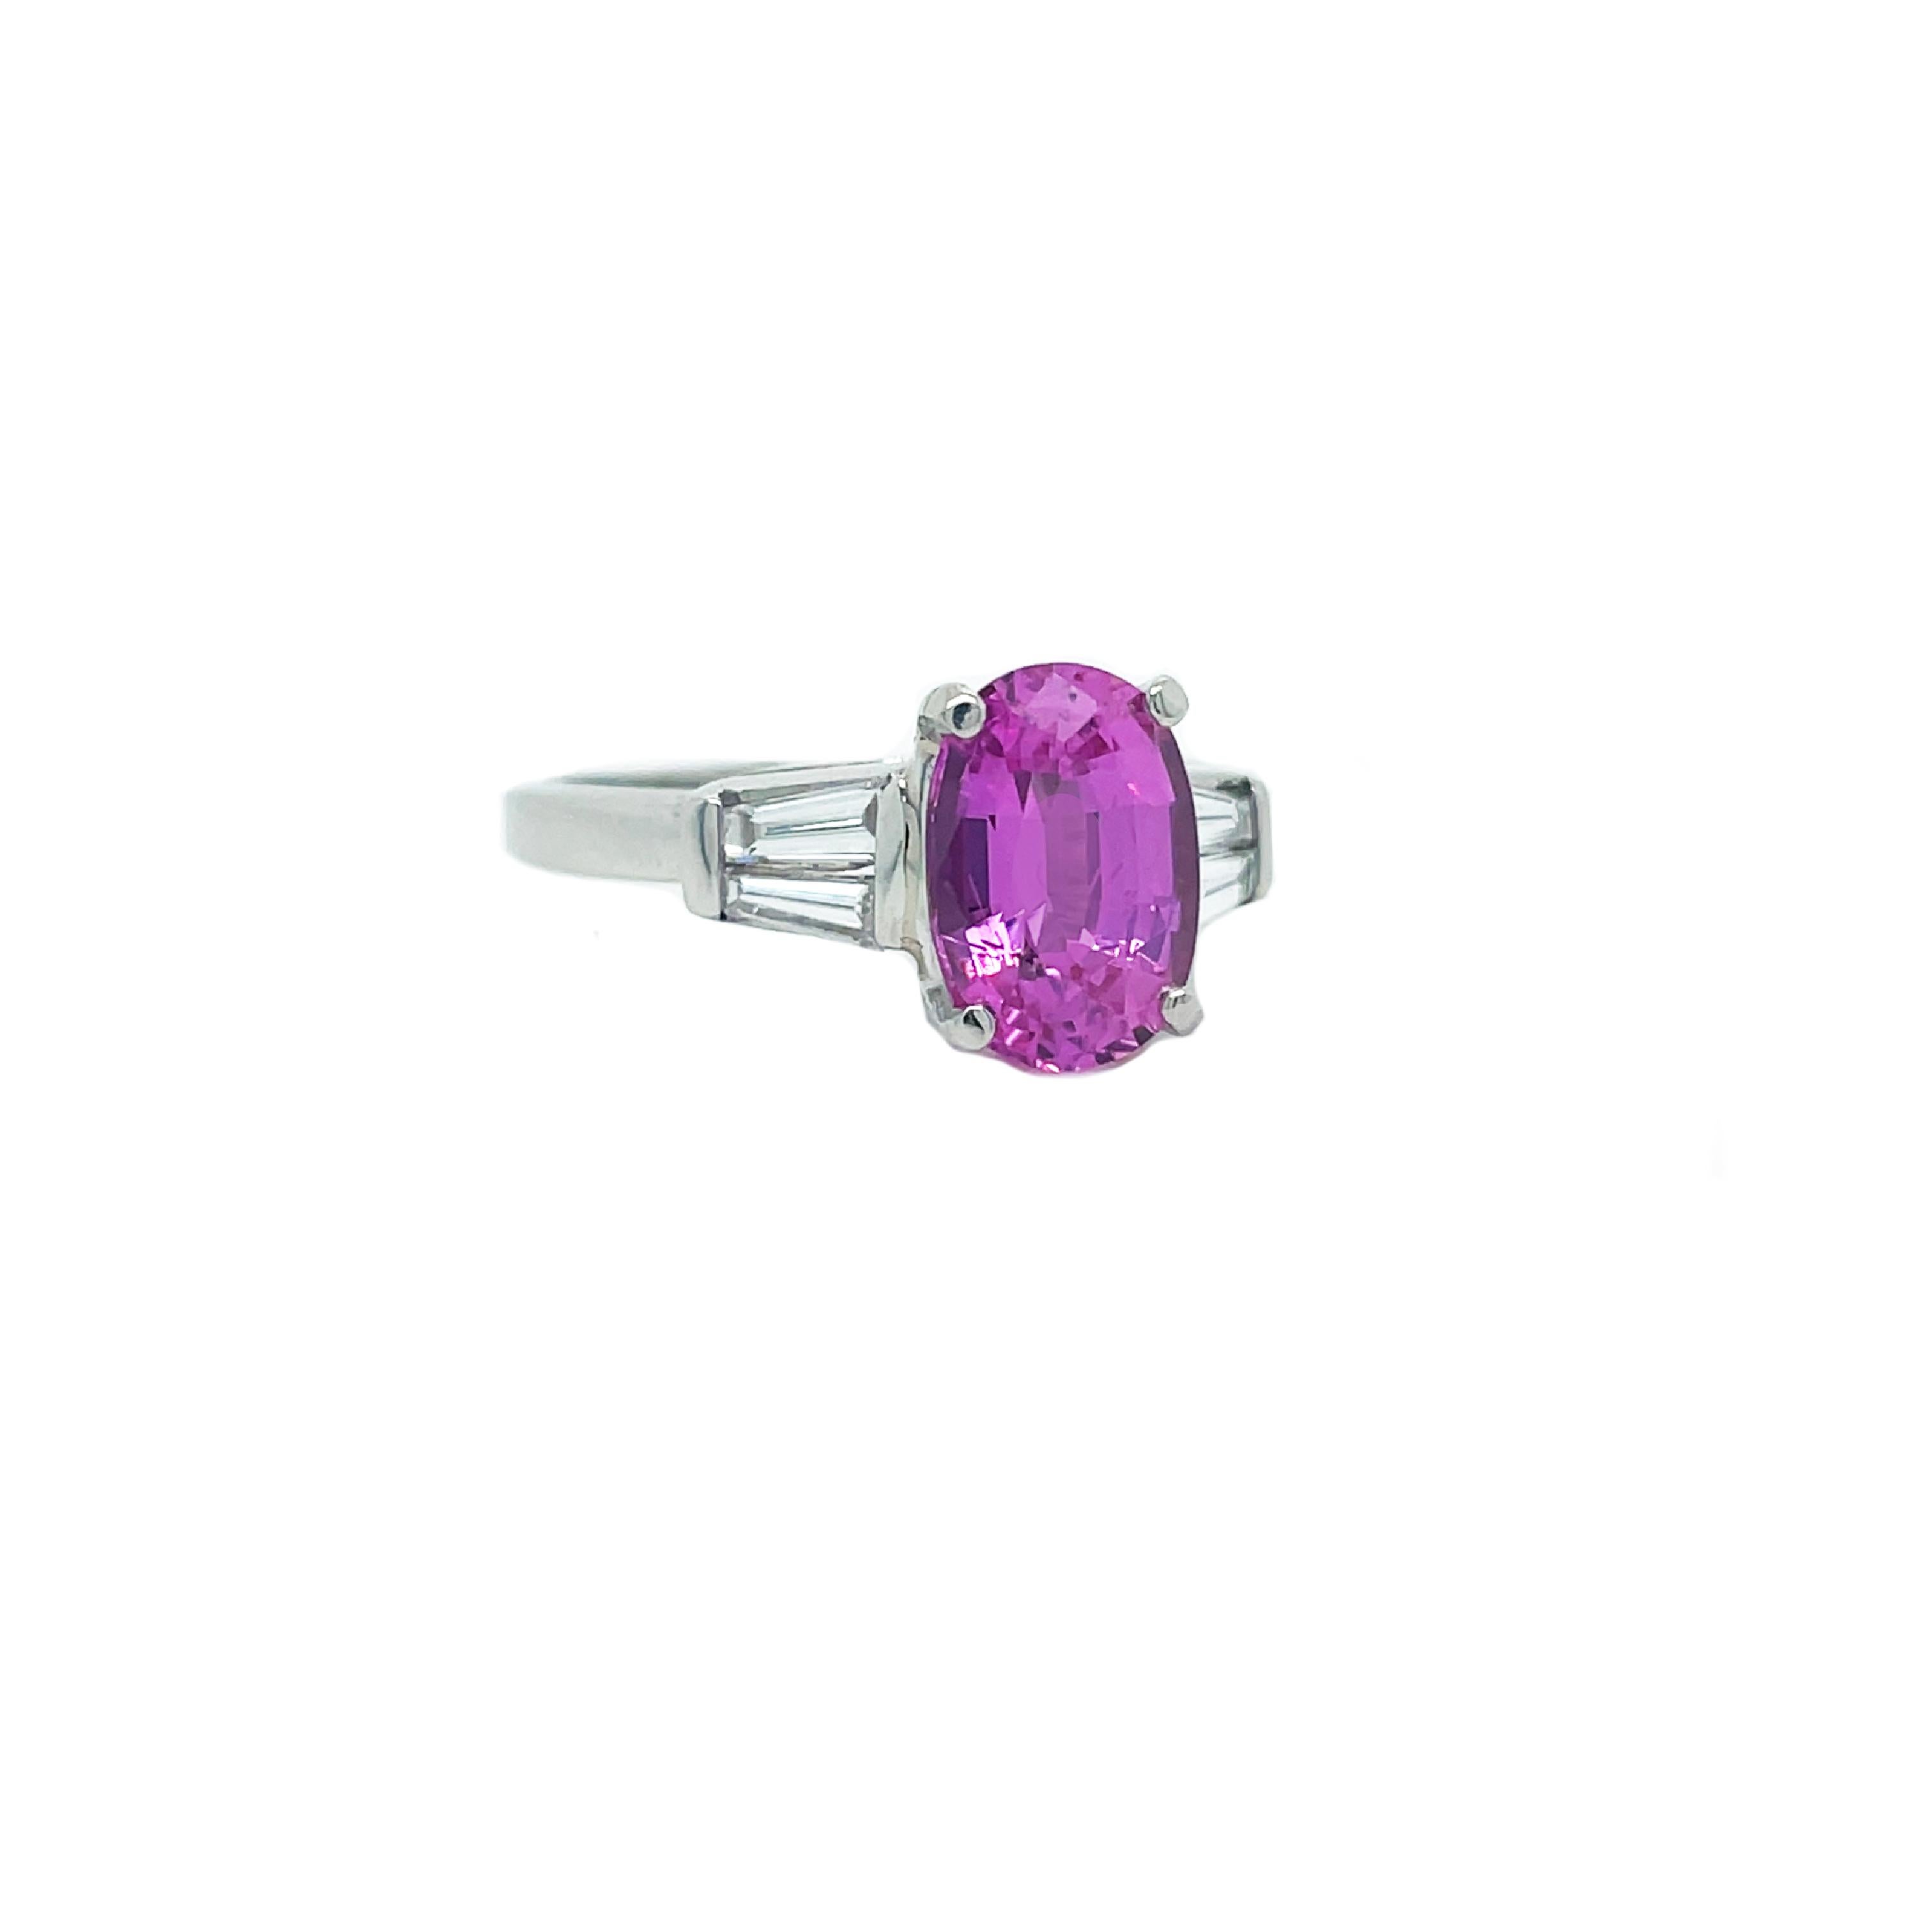 This is a stunning 1950s platinum ring showcasing an exceptional vivid pink sapphire with baguette shoulders! In this truly incredible and outstanding jewel, a 2.17-carat oval sapphire radiates a luscious, vivid and playful pink between a pair of